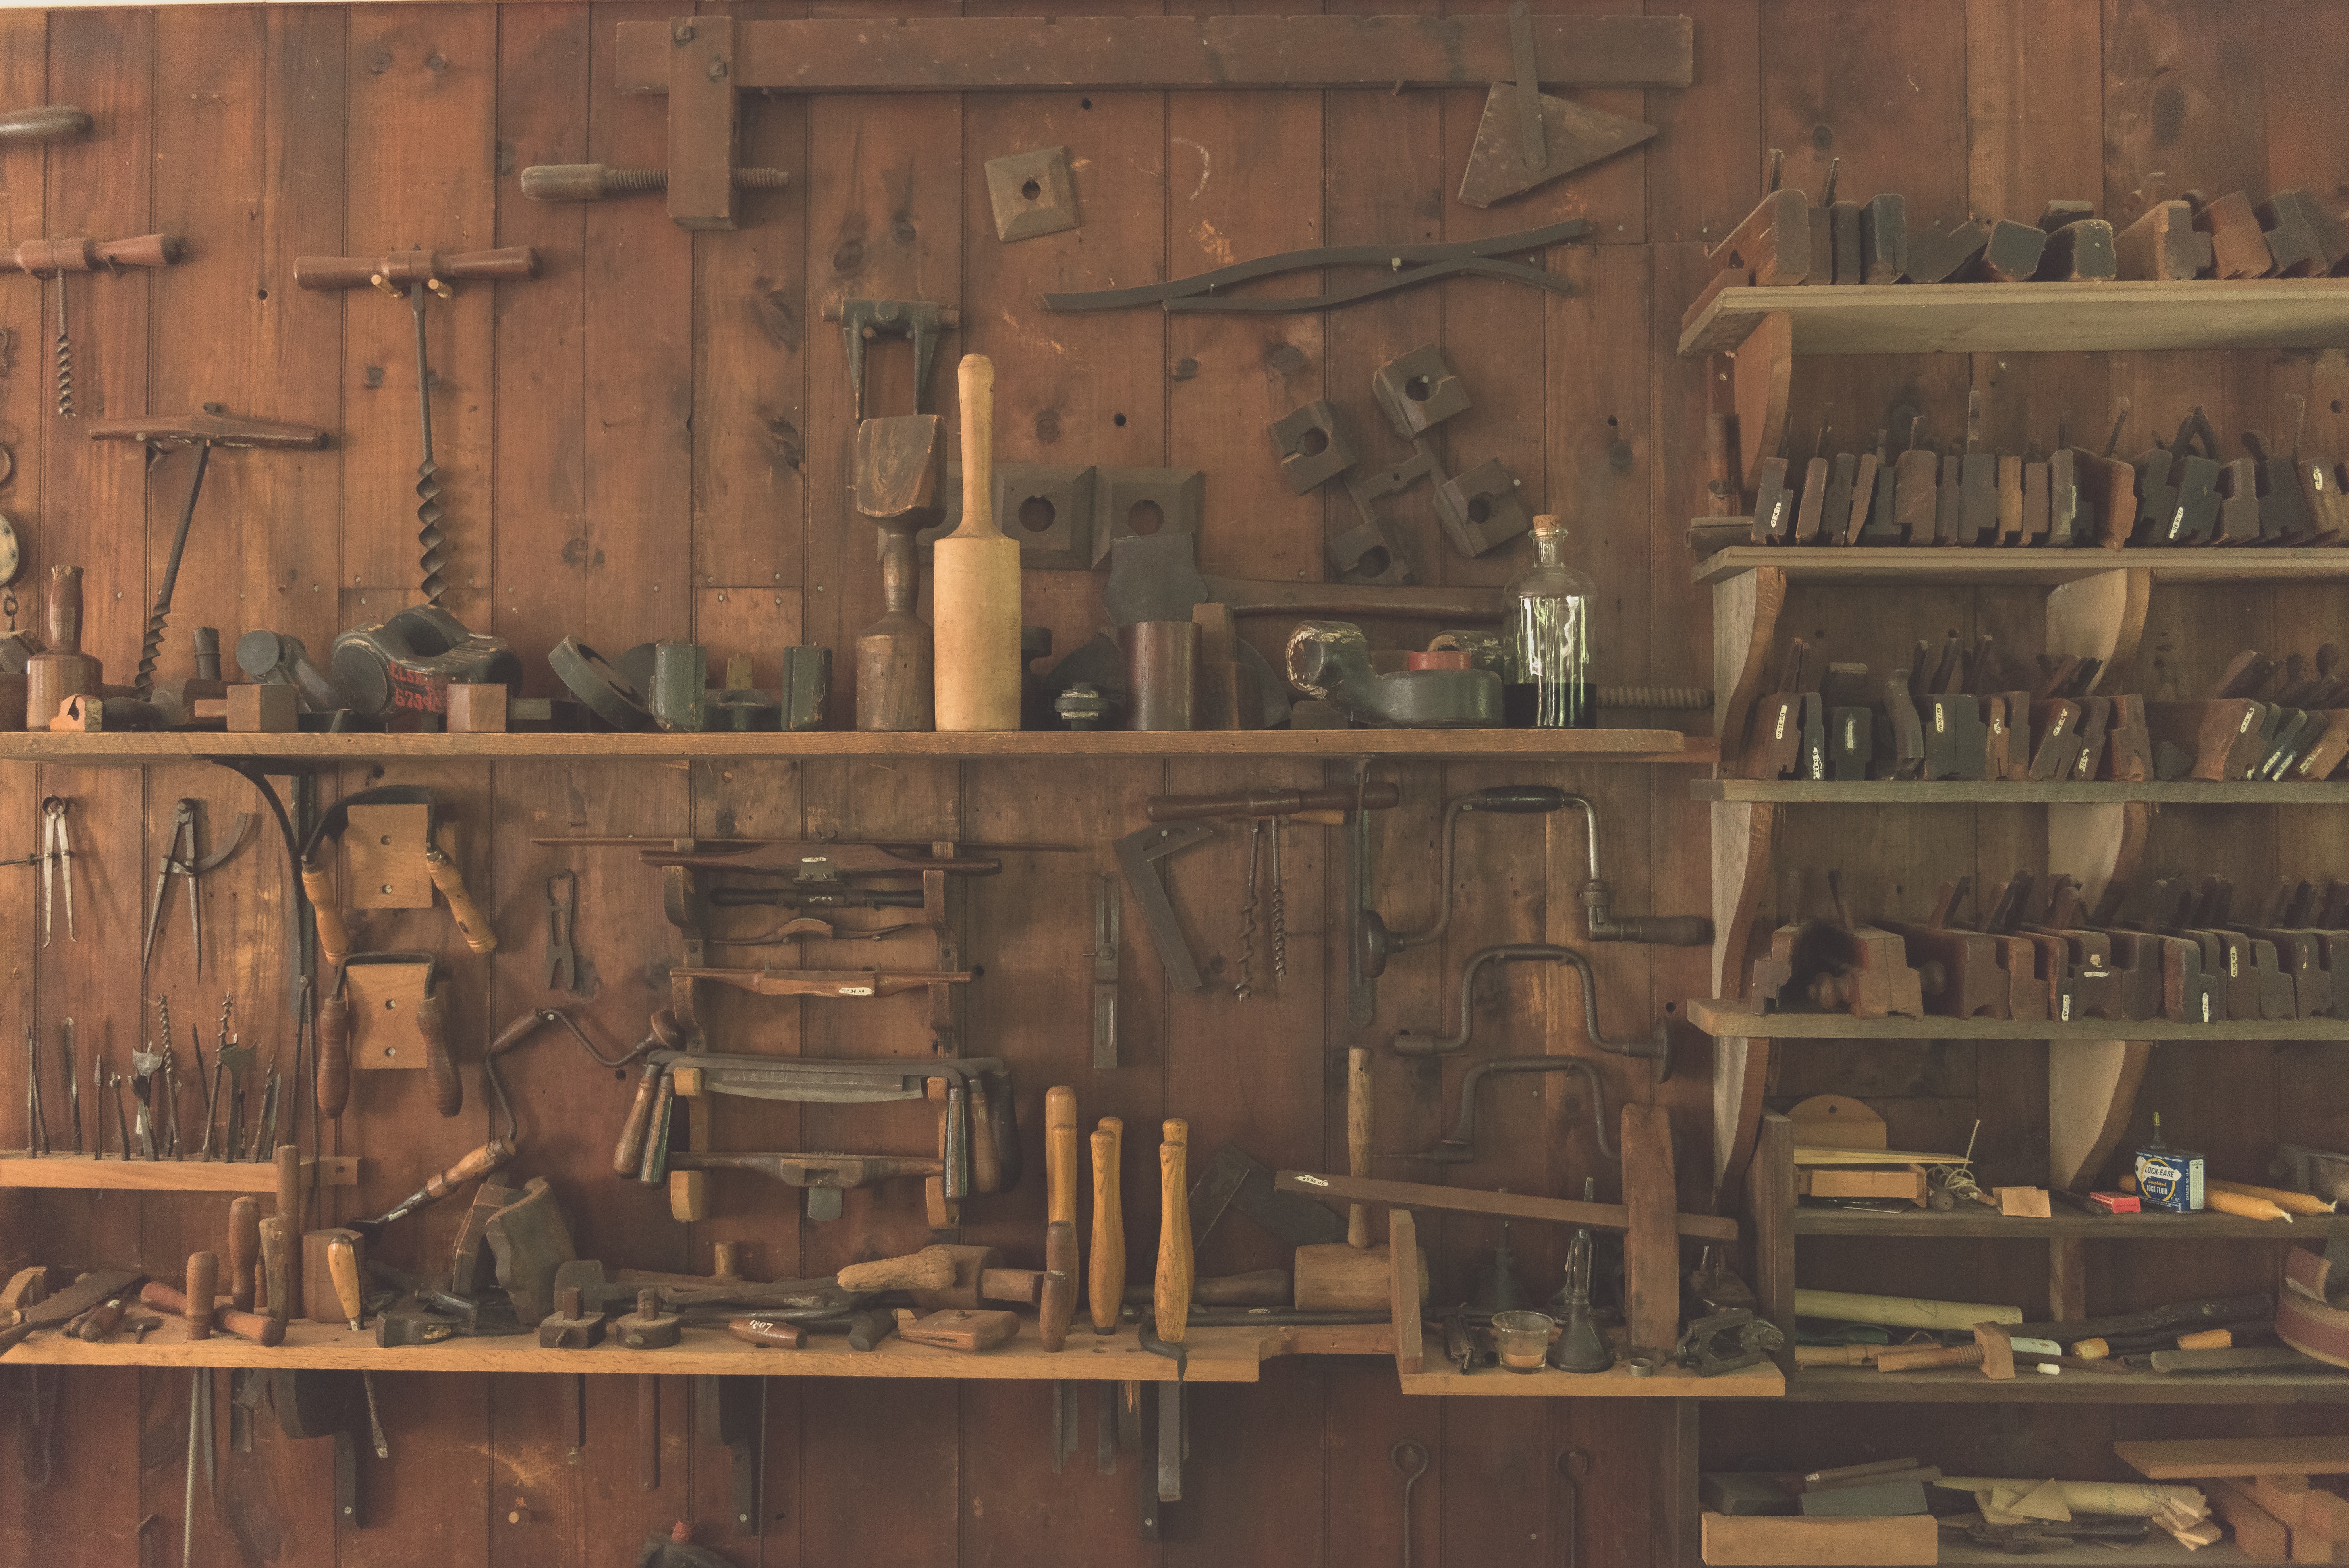 Photo of tools hung on wall